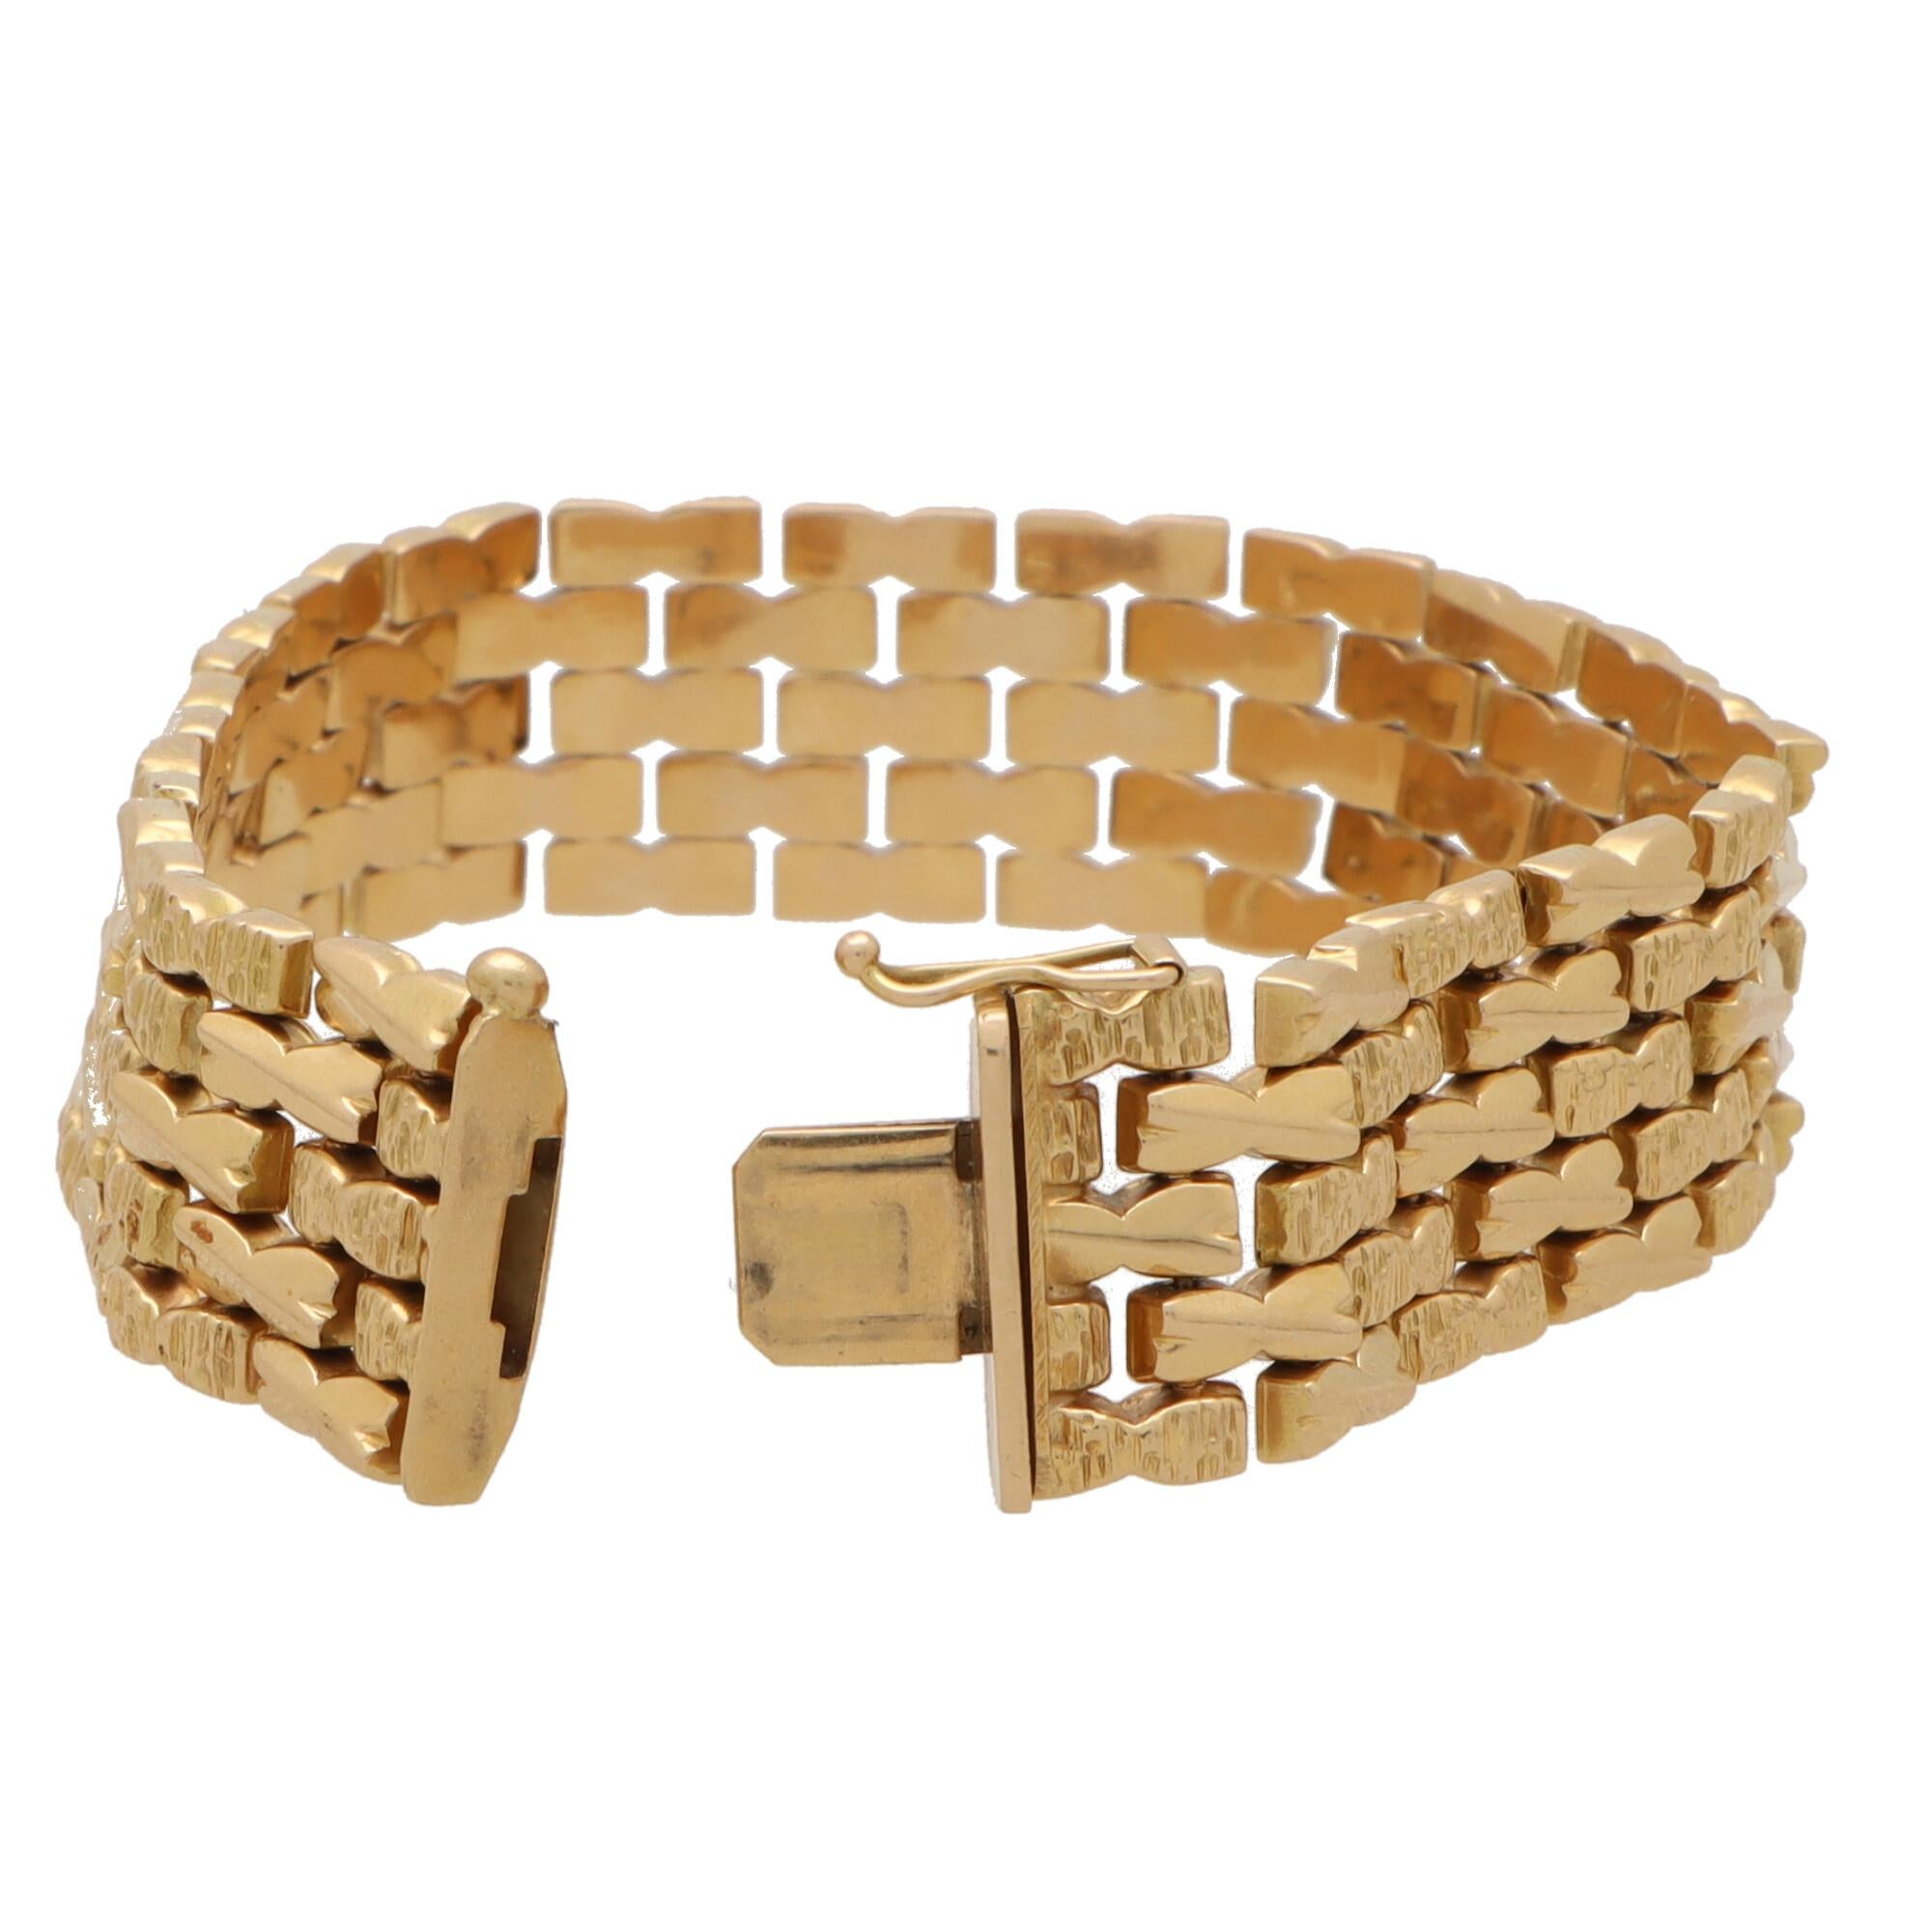 A beautiful vintage chevron brickwork bracelet set in 18k rose gold.

The bracelet is composed of five rows of bowtie-shaped links in a brickwork pattern. The bricks are arranged in a chevron pattern of alternating polished and hammered links. The